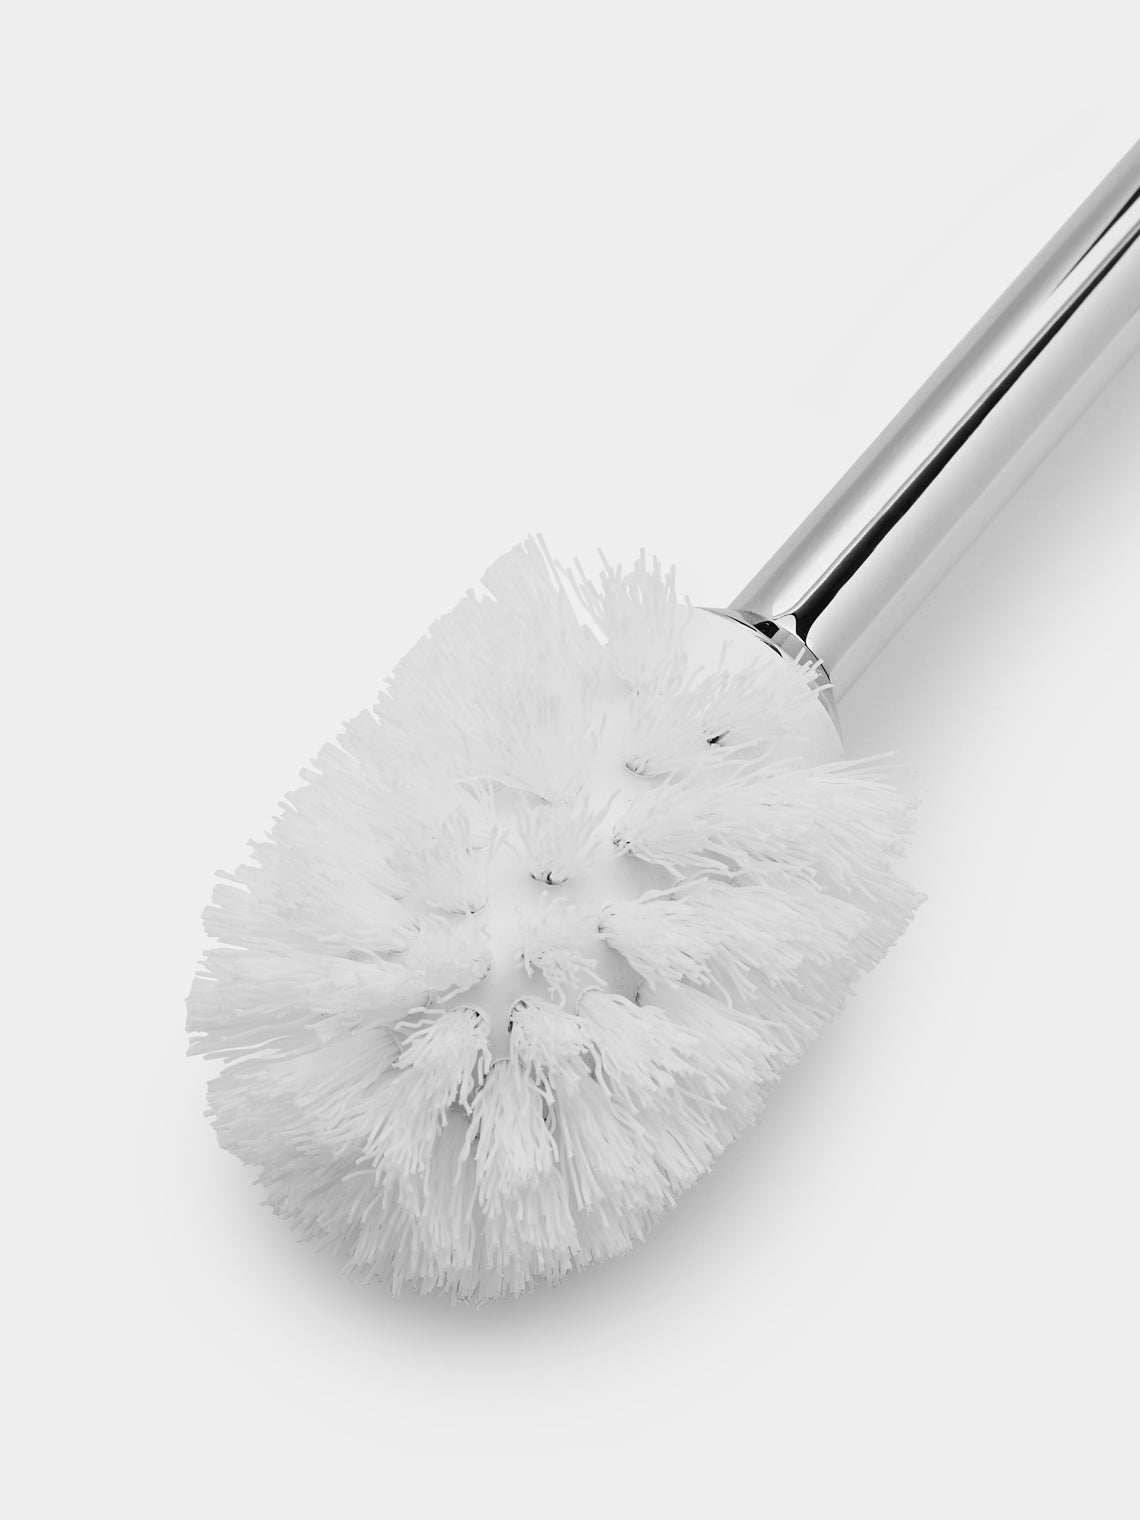 Décor Walther - Ash Wood Toilet Brush -  - ABASK